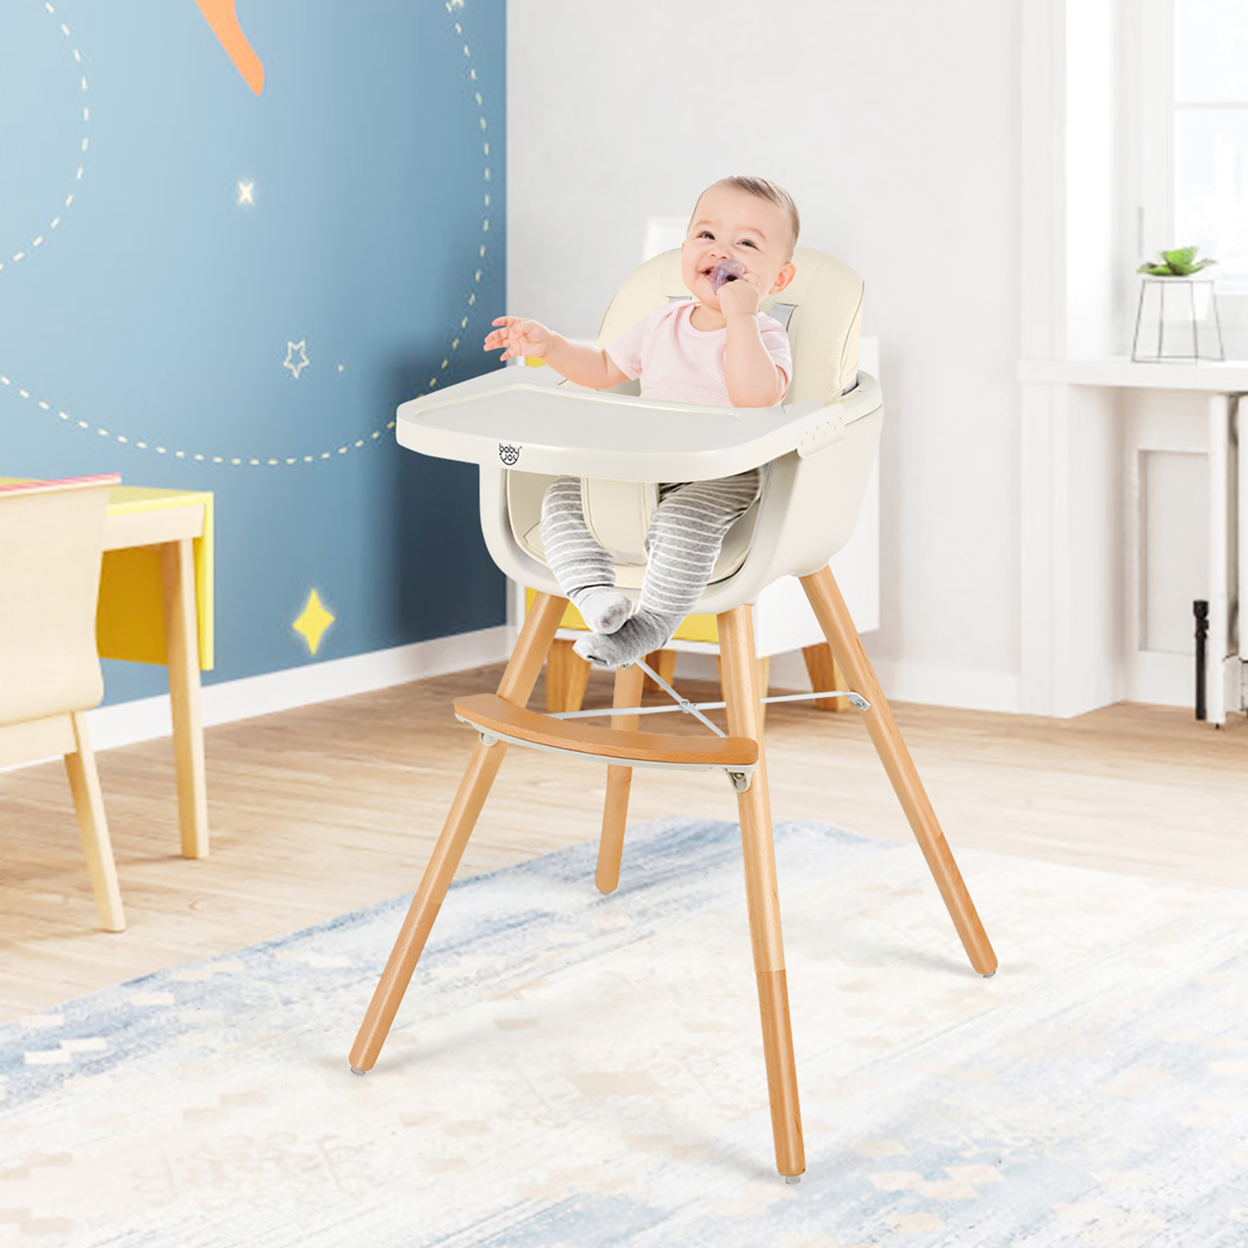 Babyjoy 3 In 1 Convertible Wooden High Chair Baby Toddler Highchair W/ Cushion